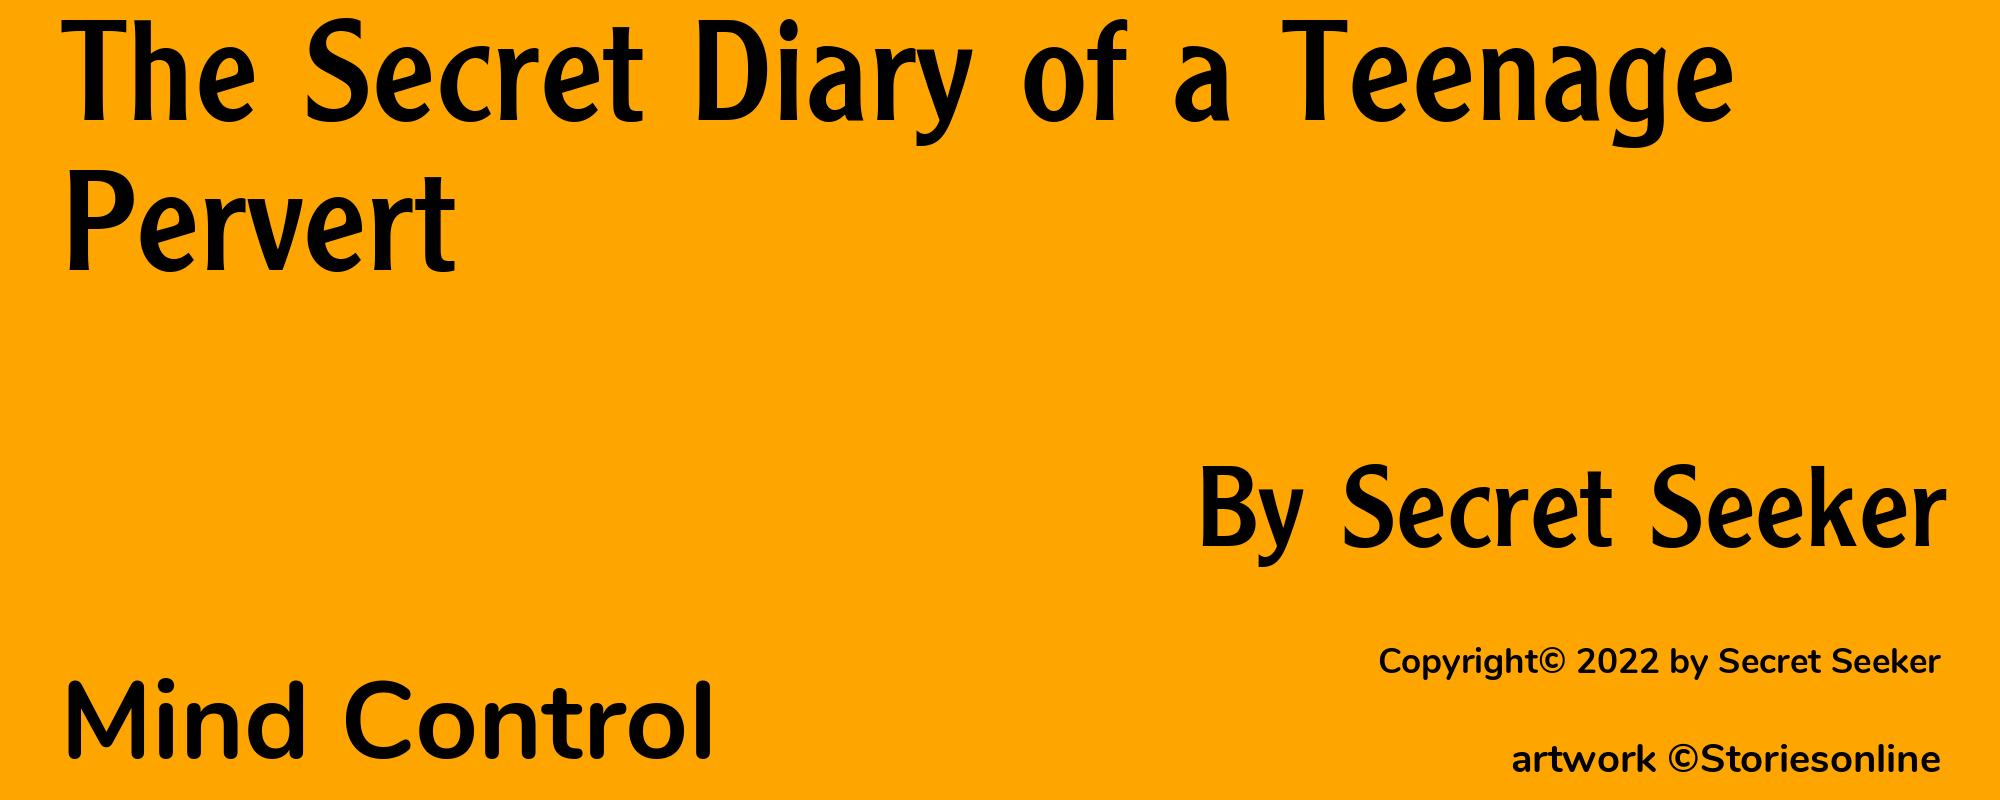 The Secret Diary of a Teenage Pervert - Cover